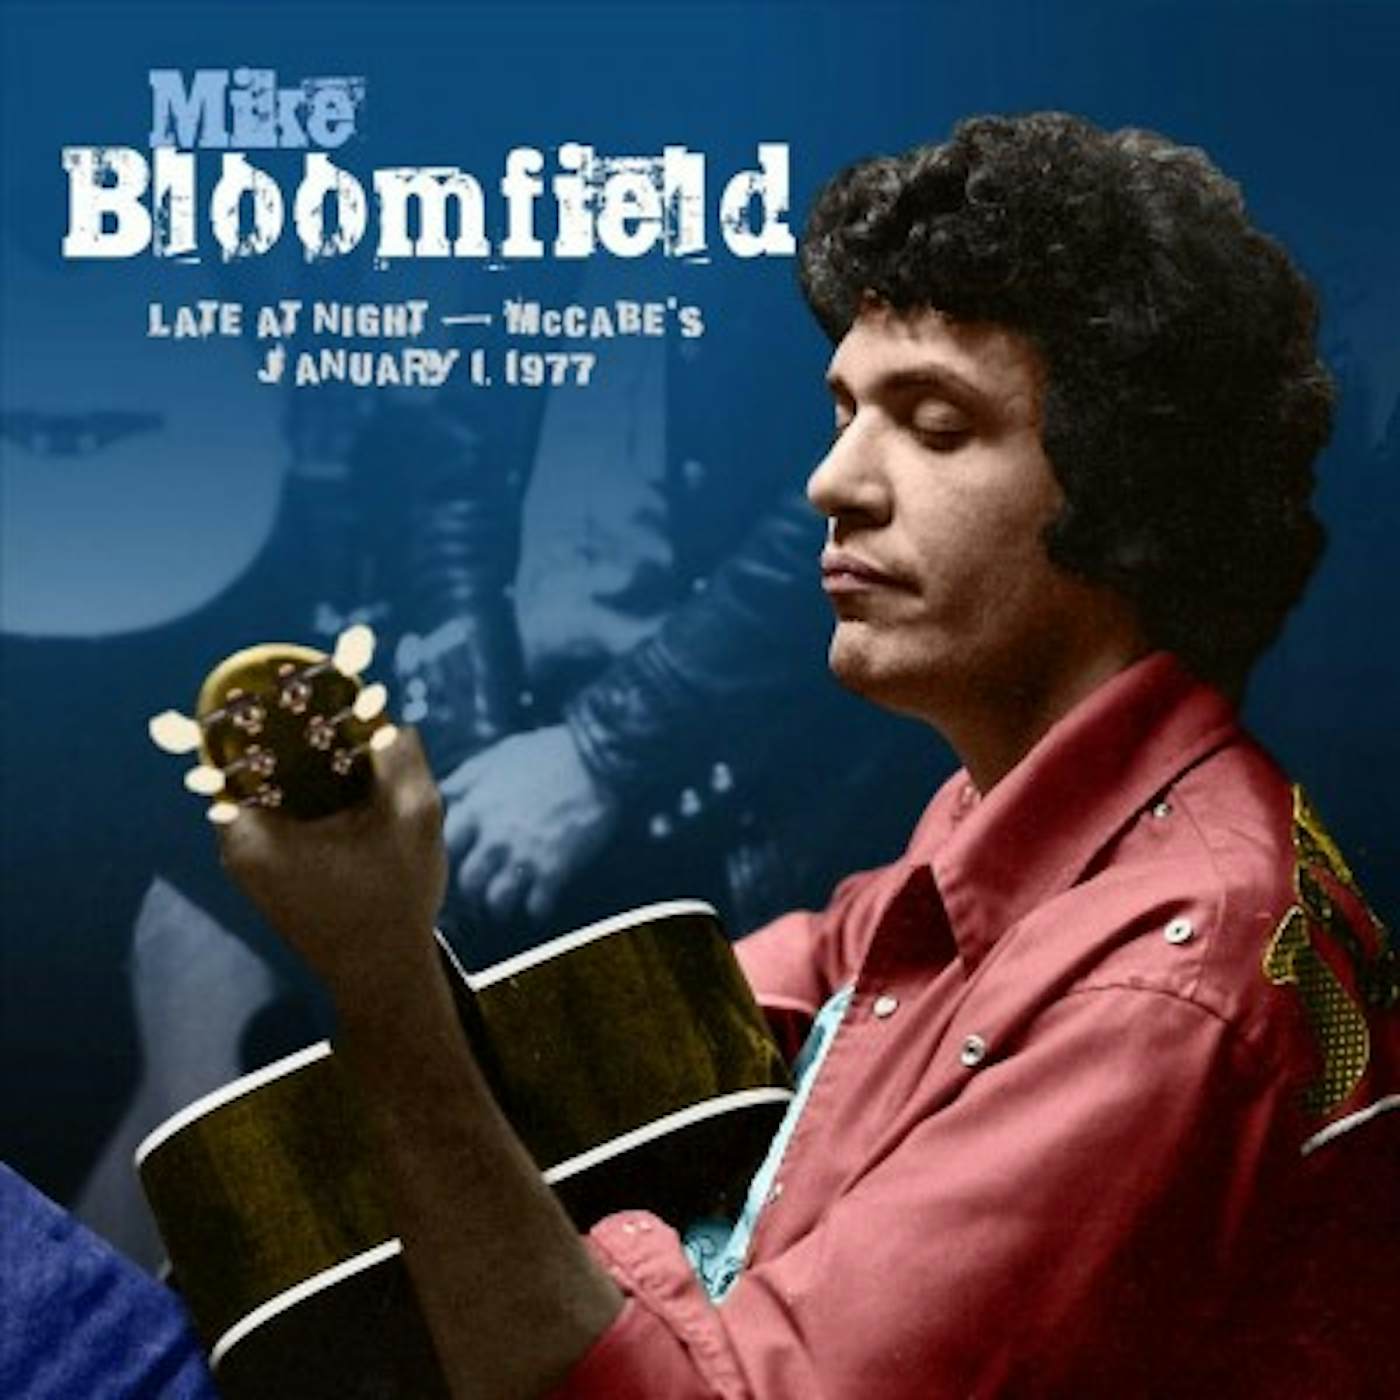 Mike Bloomfield Late At Night: McCabes, January 1, 1977 CD